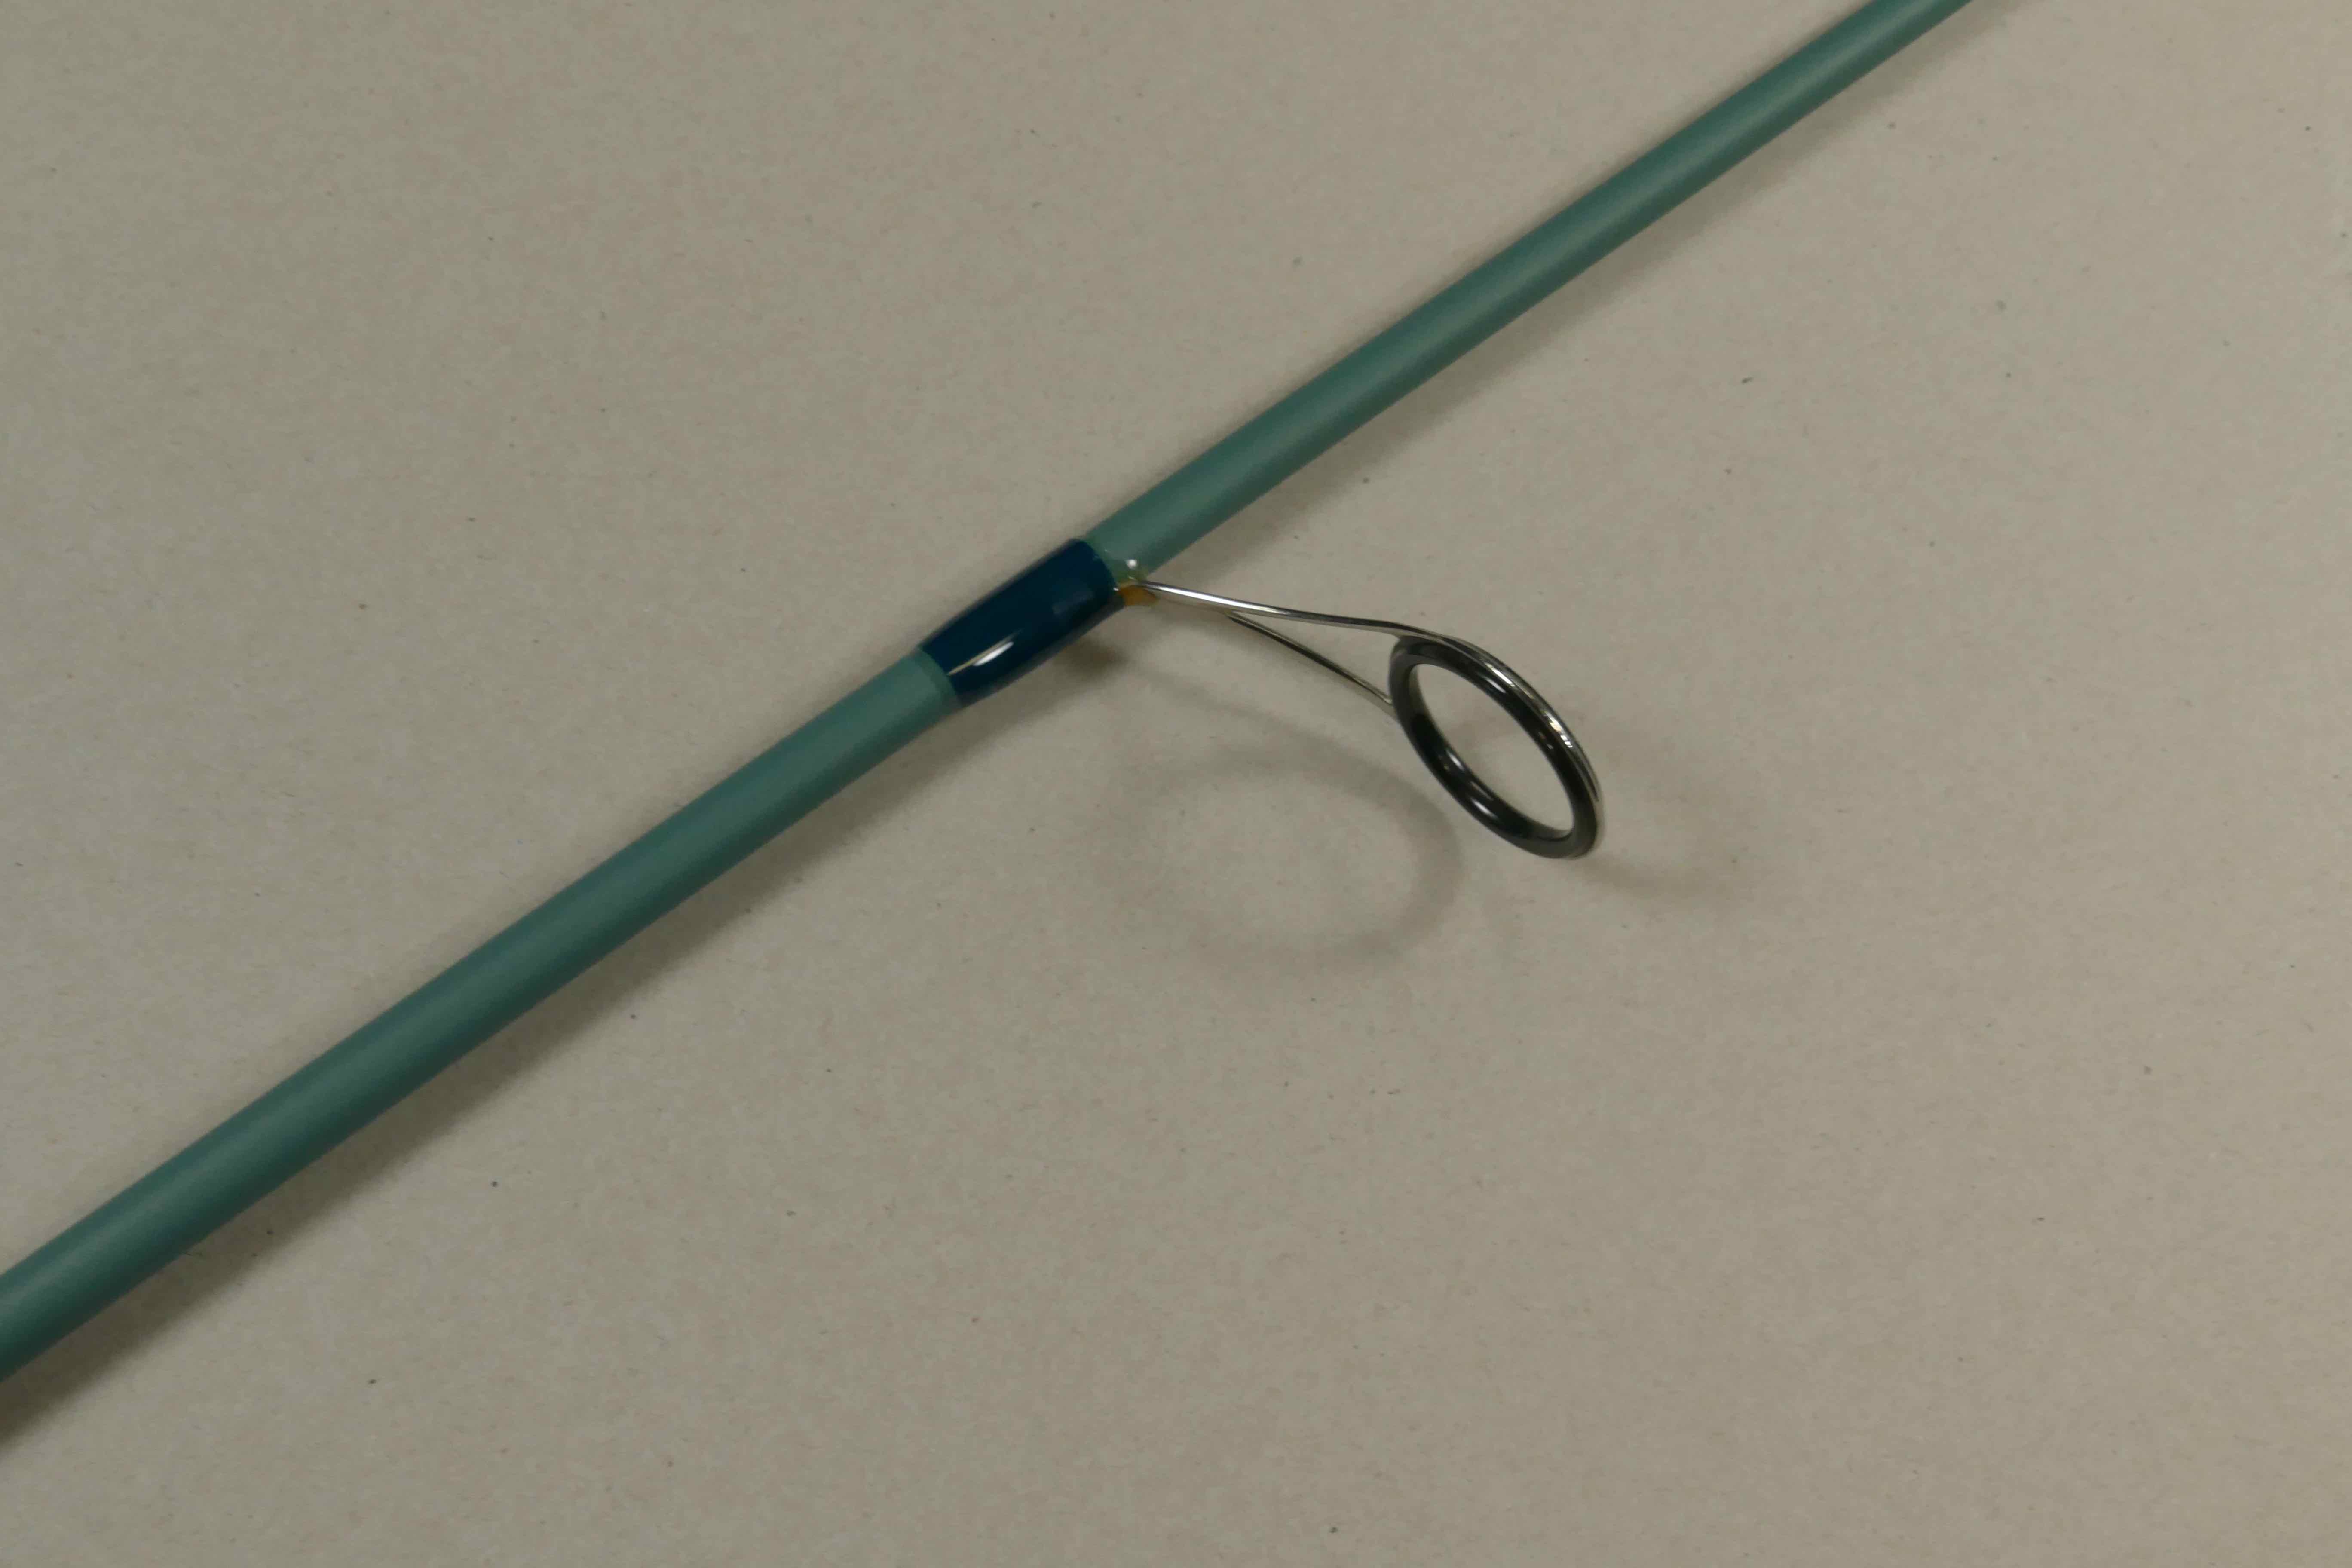 G. Loomis Greenwater 8’ 2” mag-medium, 1 piece power spinning rod for 1/4 to 1 1/4 oz. lures. GWR981S 10899-01     $160.00